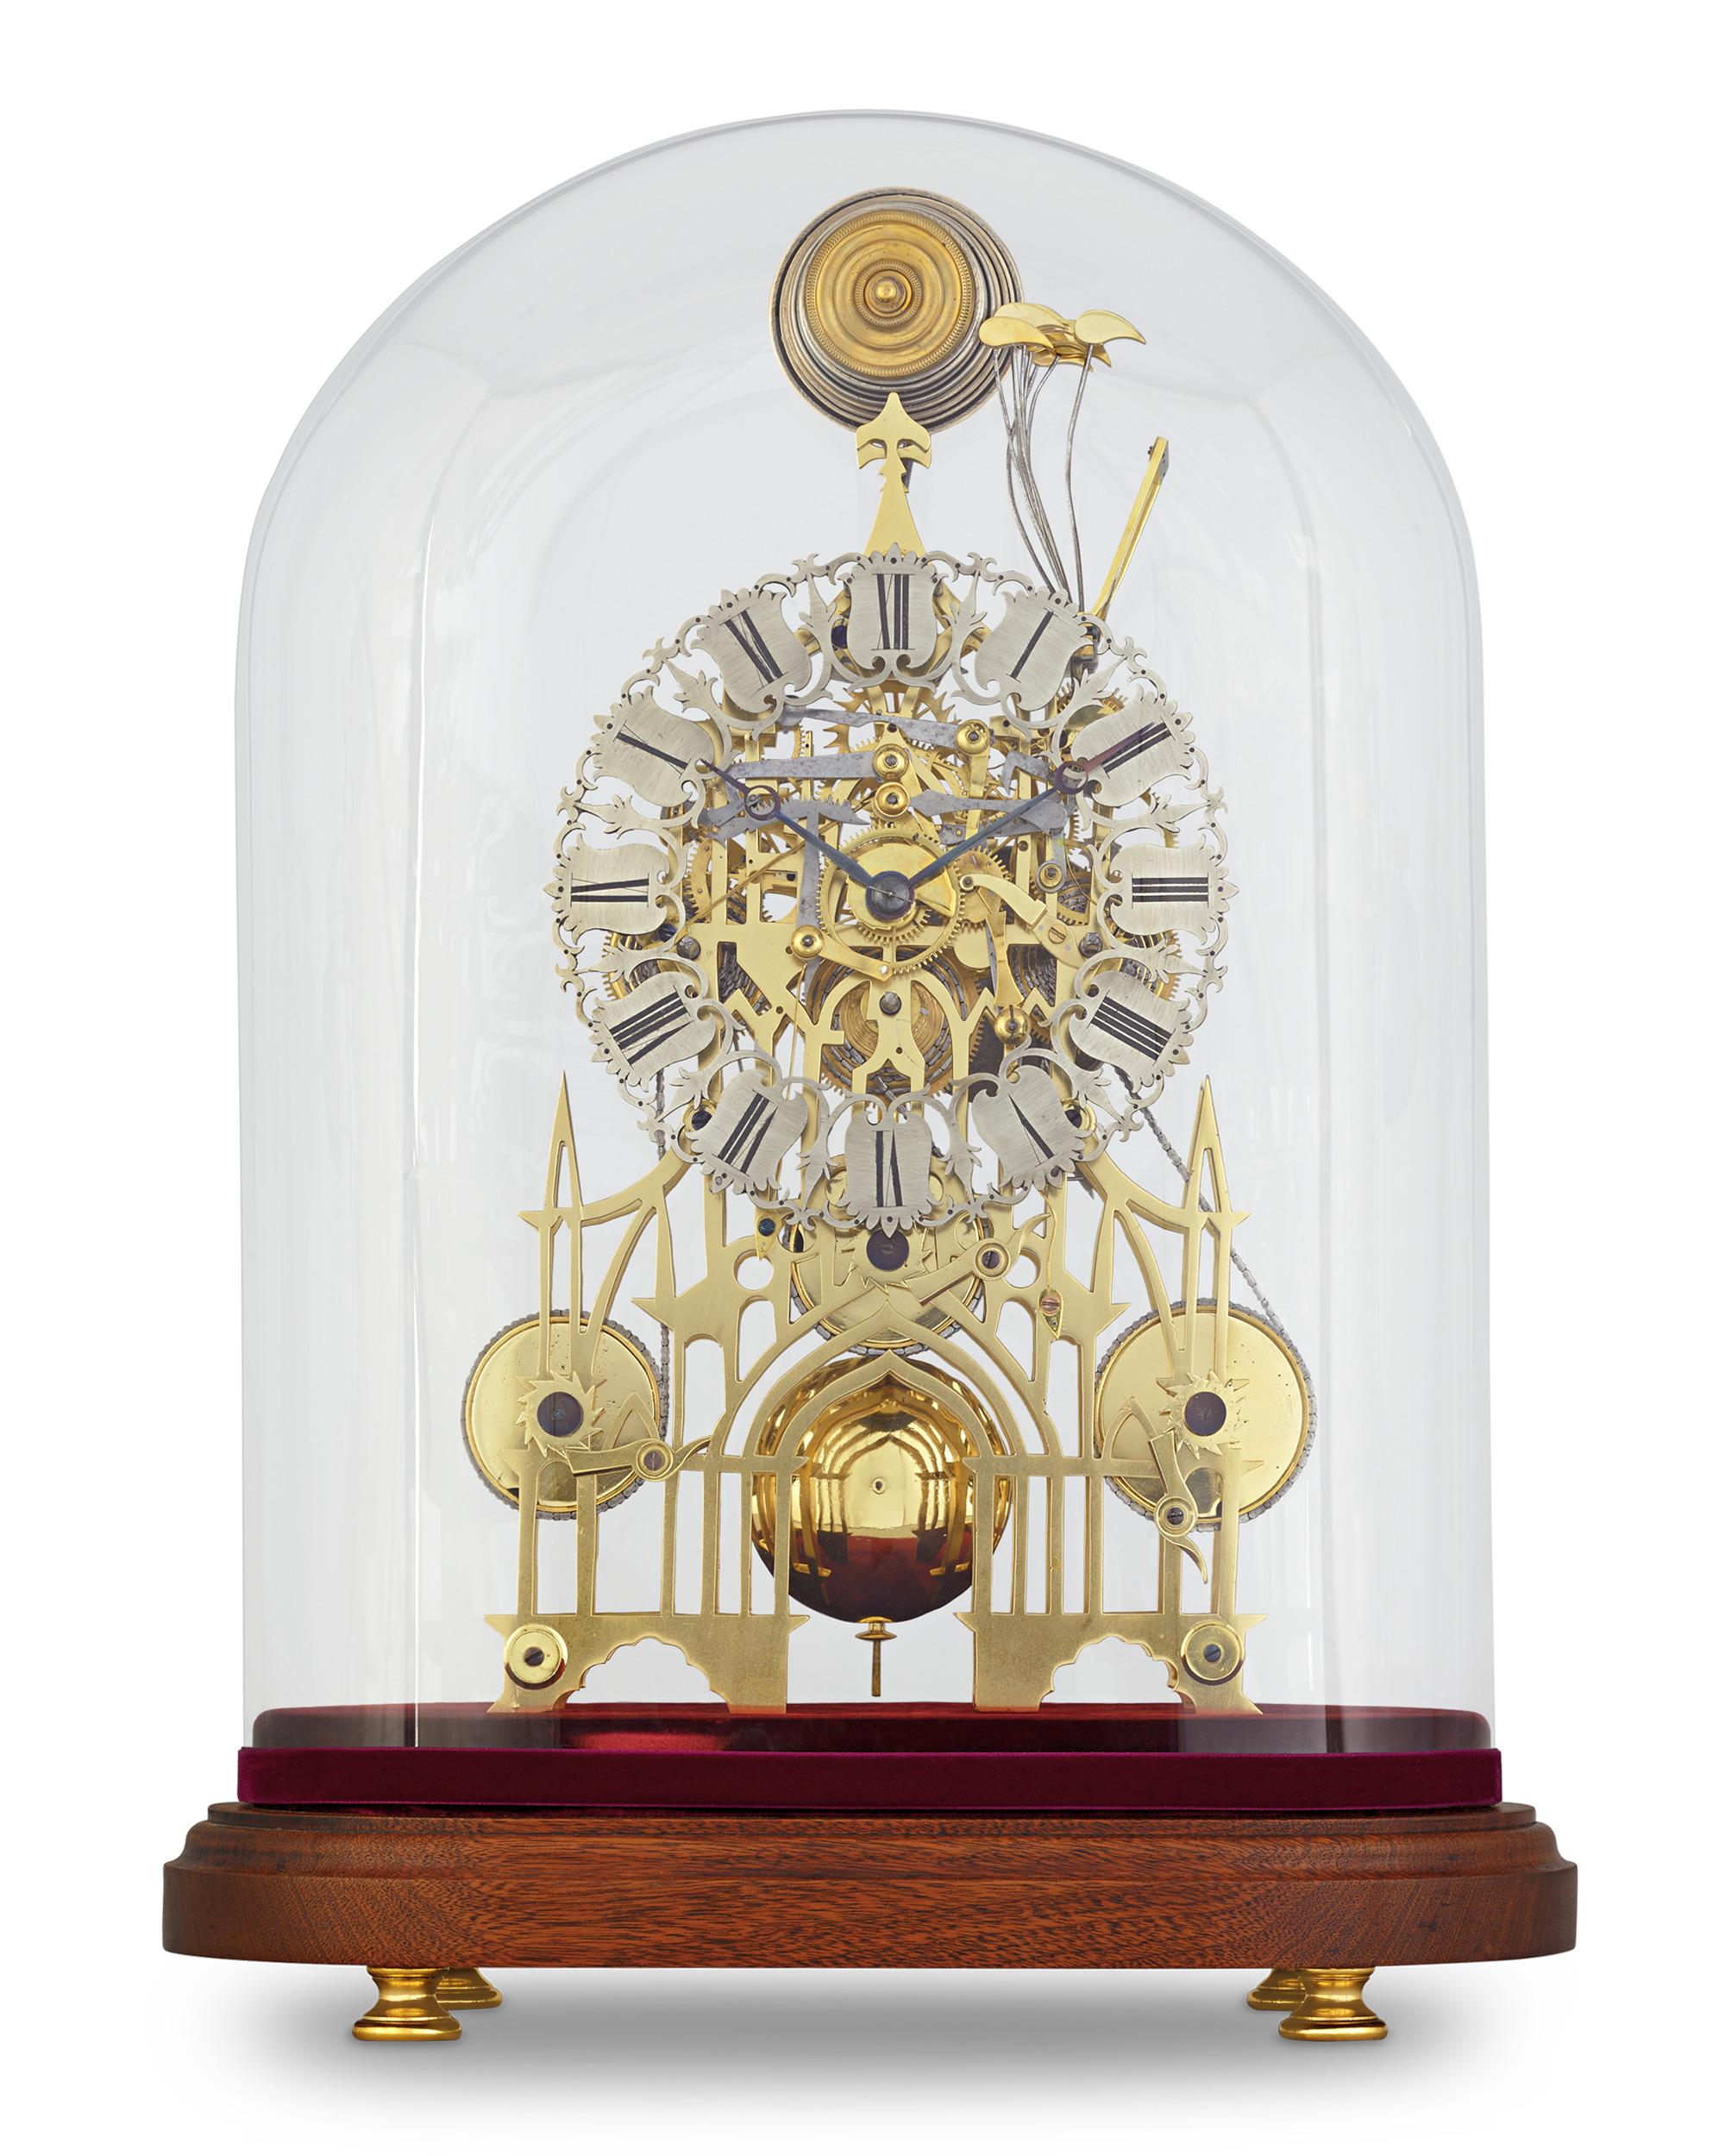 A spectacular feat of engineering and artistry, this 19th-century skeleton clock was created by John Smith & Sons of Clerkenwell. The Clerkenwell Borough of Central London has for almost two centuries been one of the leading centers of clockmaking